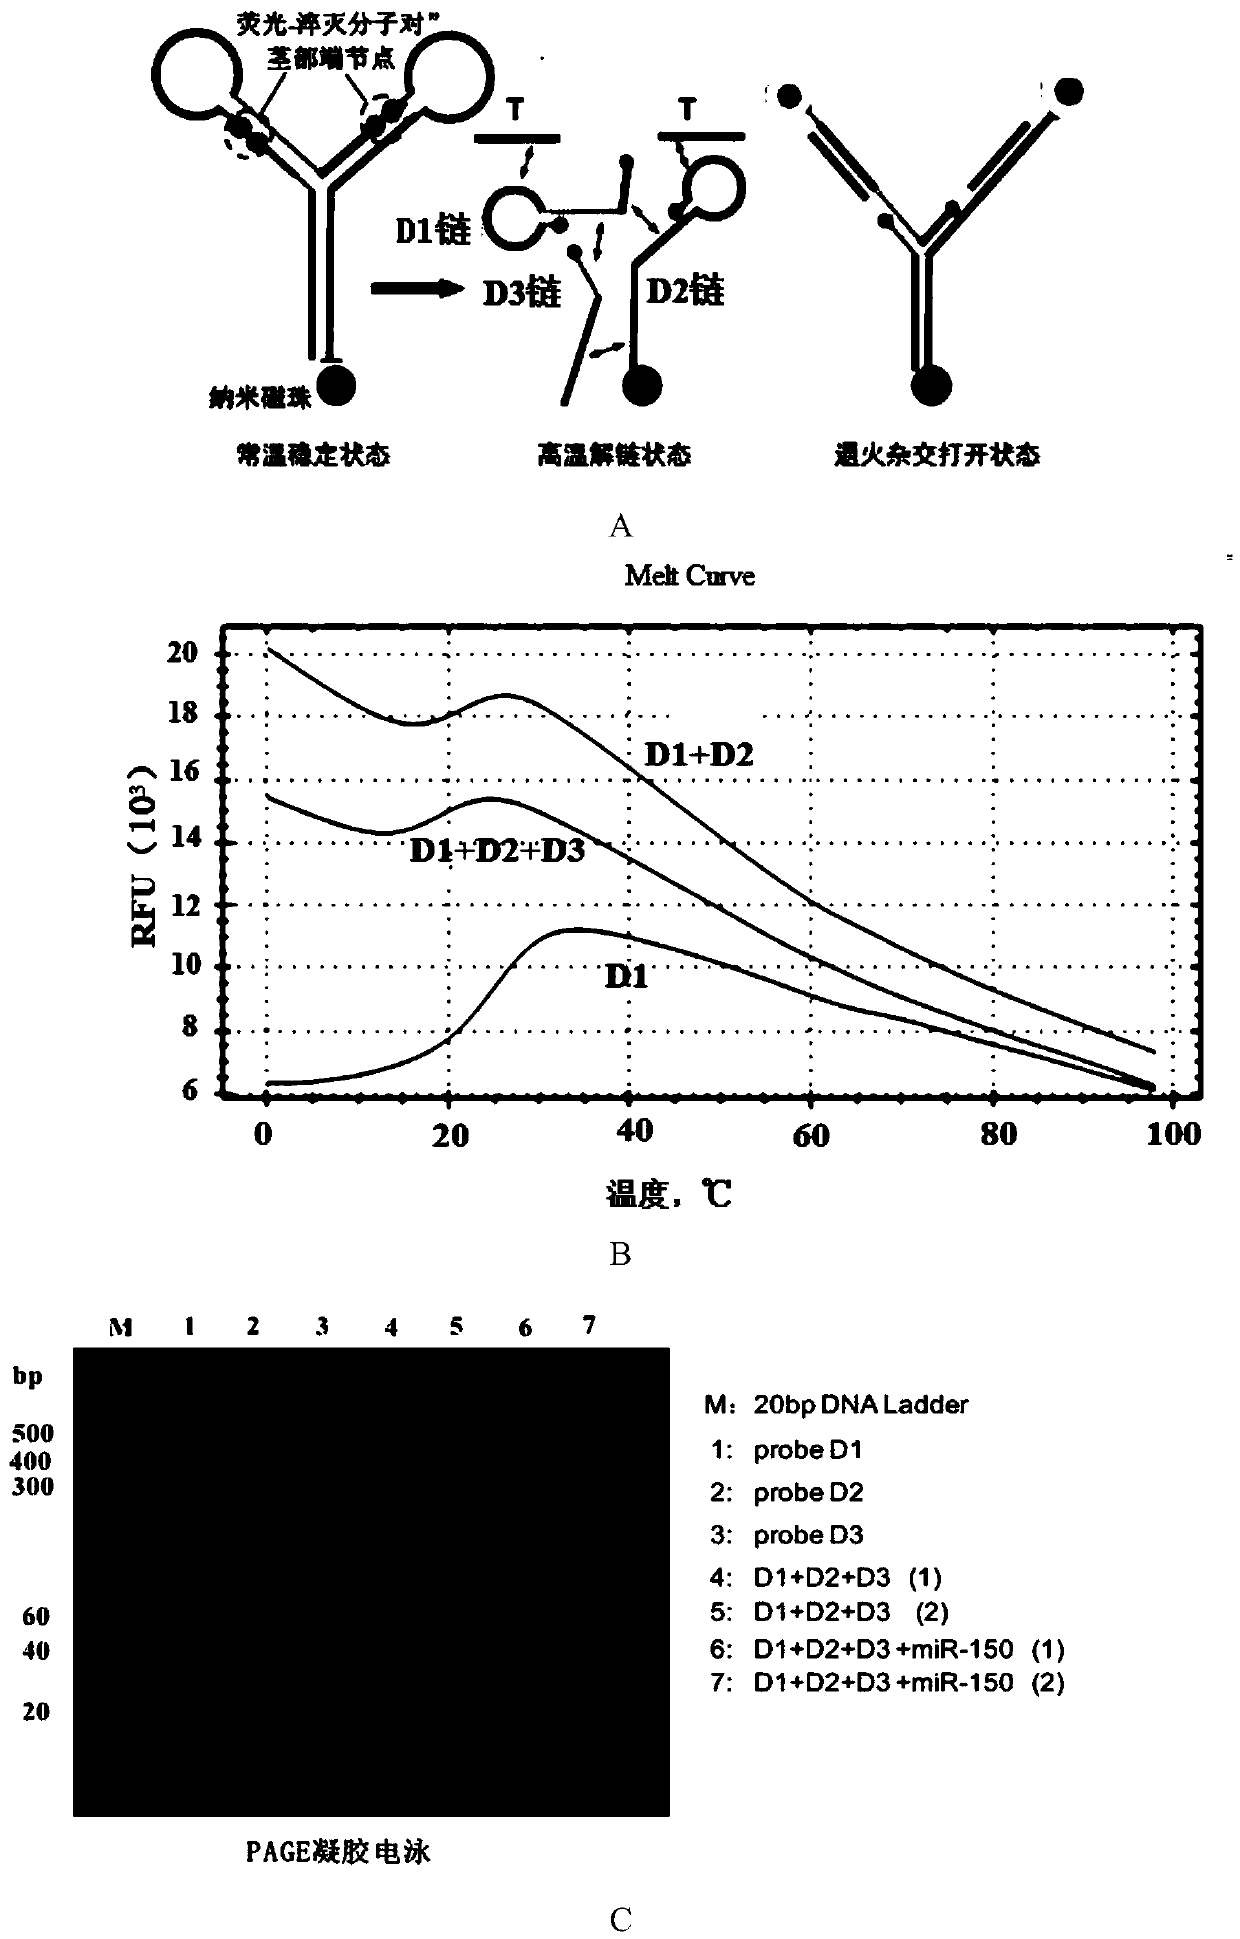 Kit and detection method based on ultrasensitive detection device of peripheral blood free nucleotide miRNAs